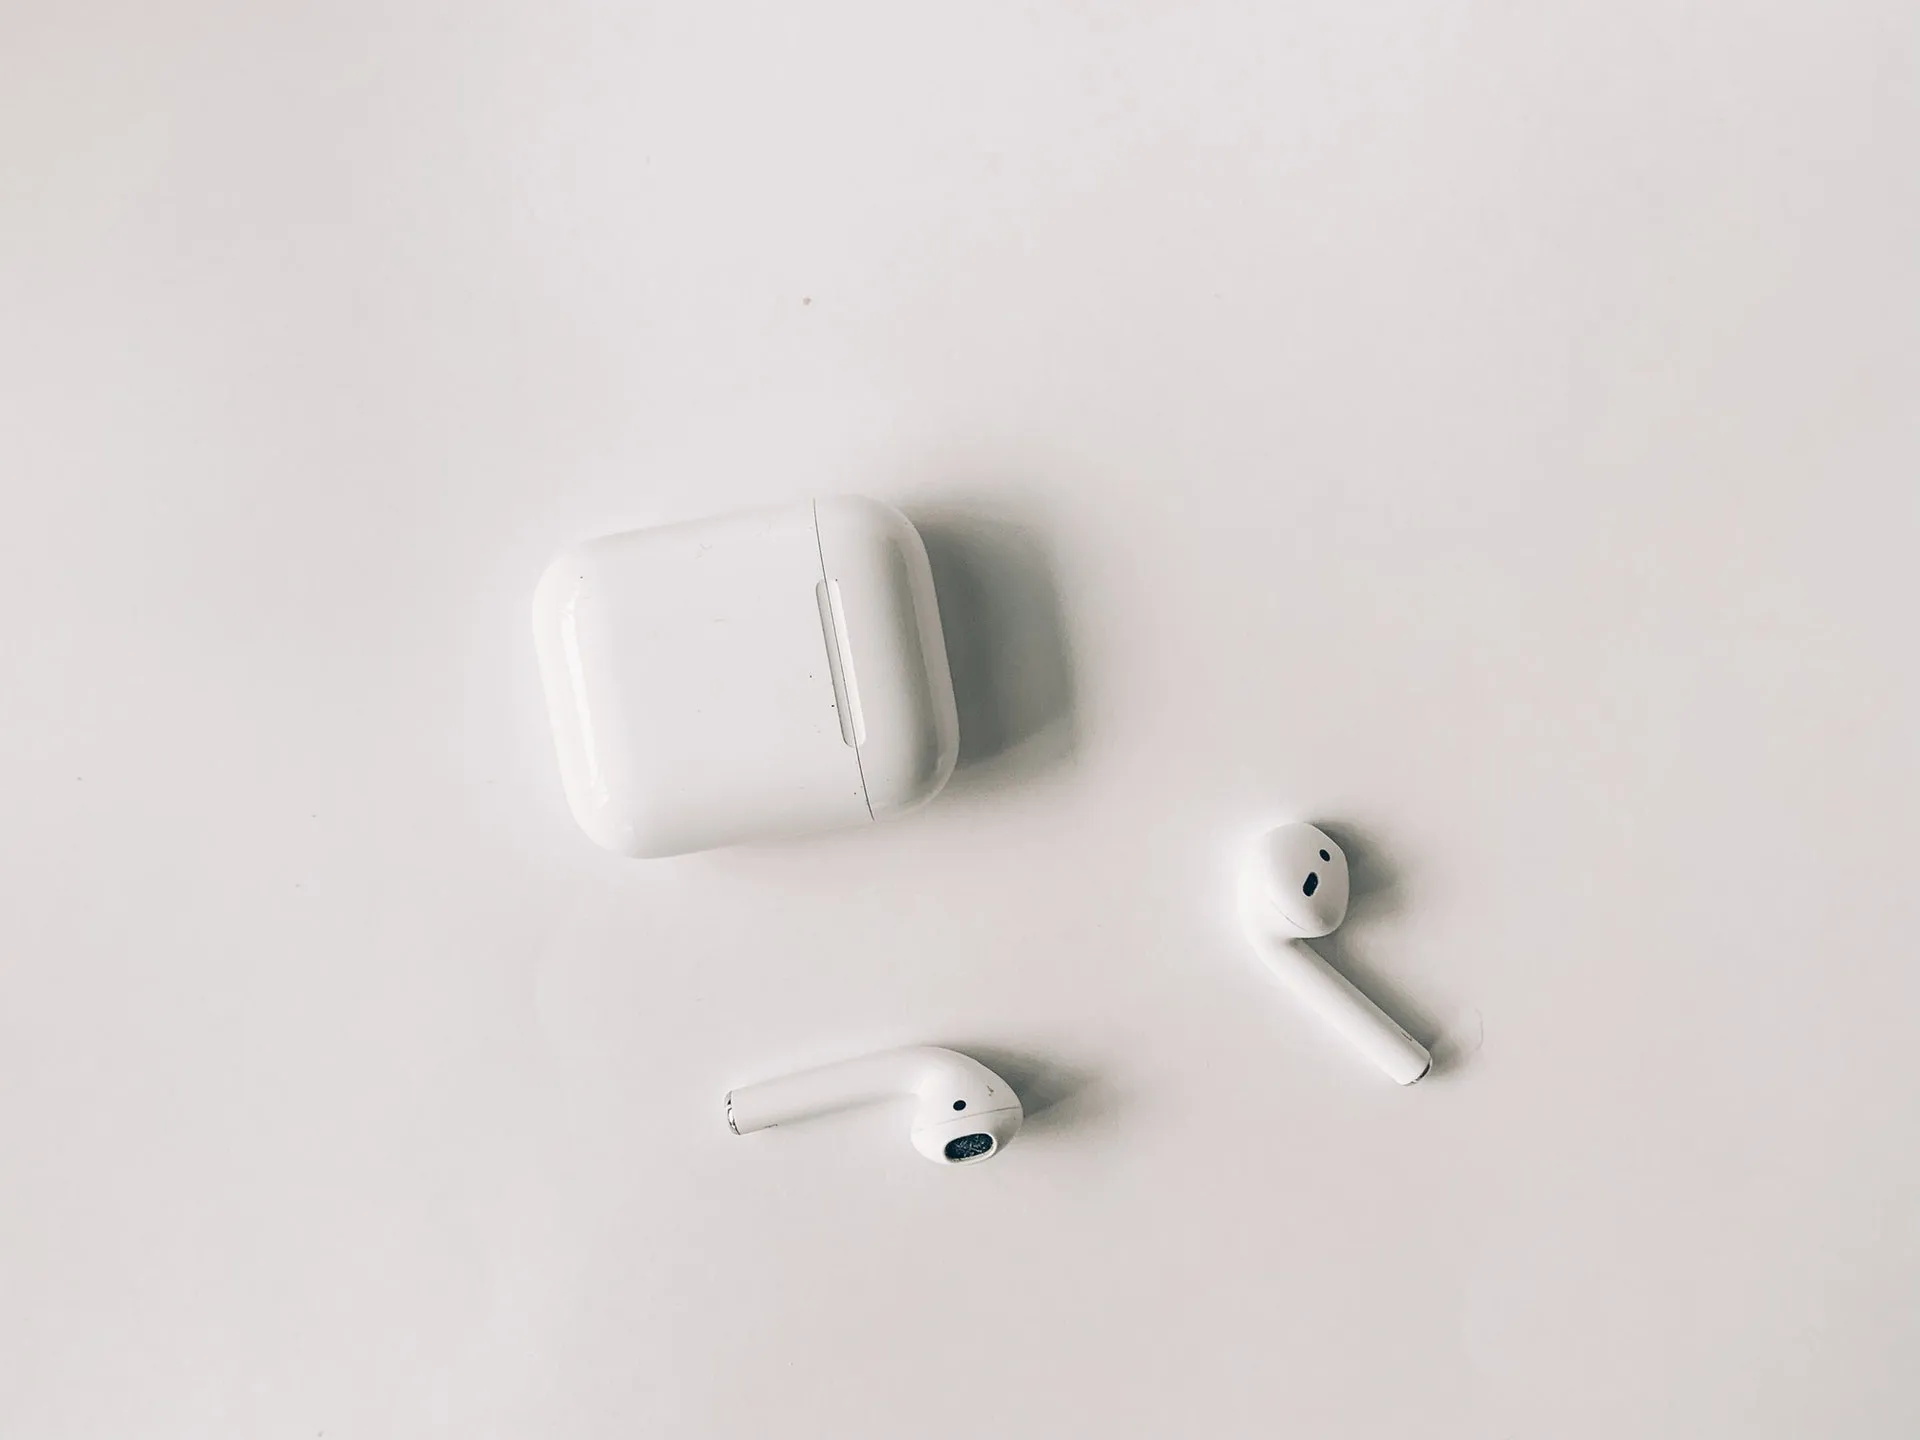 white apple airpods on white table 3825517f1603728072